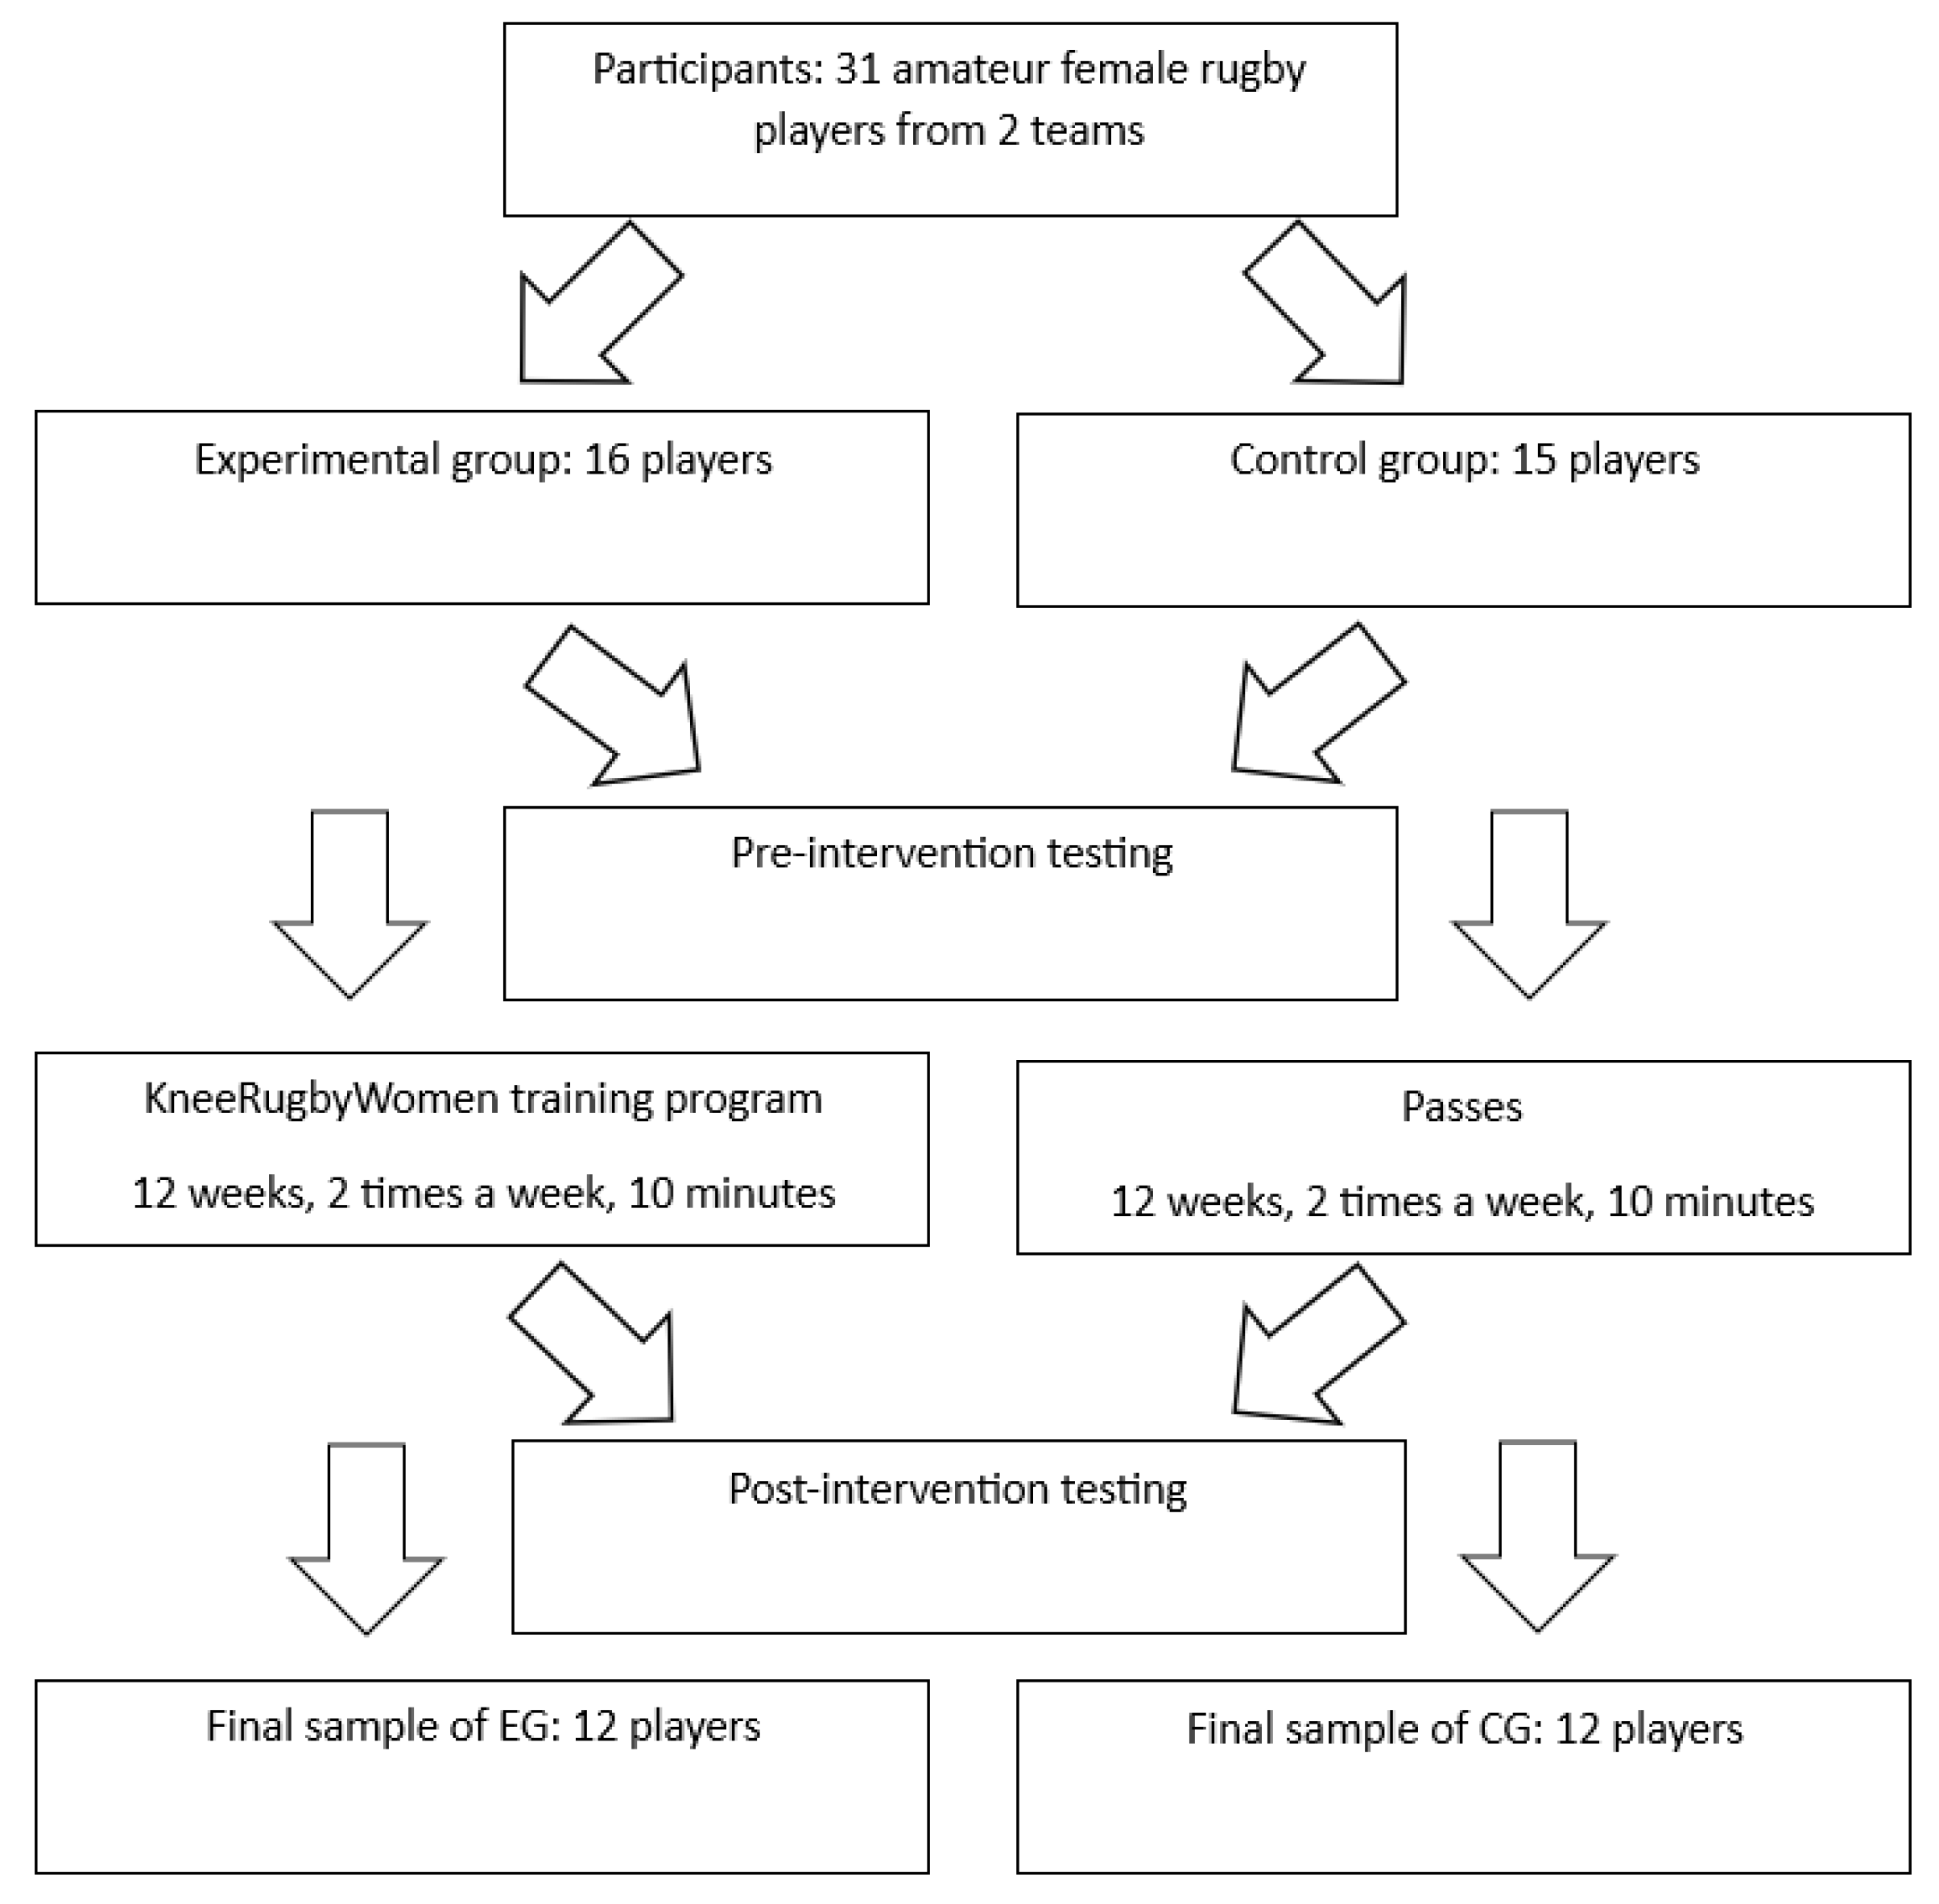 Applied Sciences Free Full-Text The Impact of a Novel Neuromuscular Training Program on Leg Stiffness, Reactive Strength, and Landing Biomechanics in Amateur Female Rugby Players photo